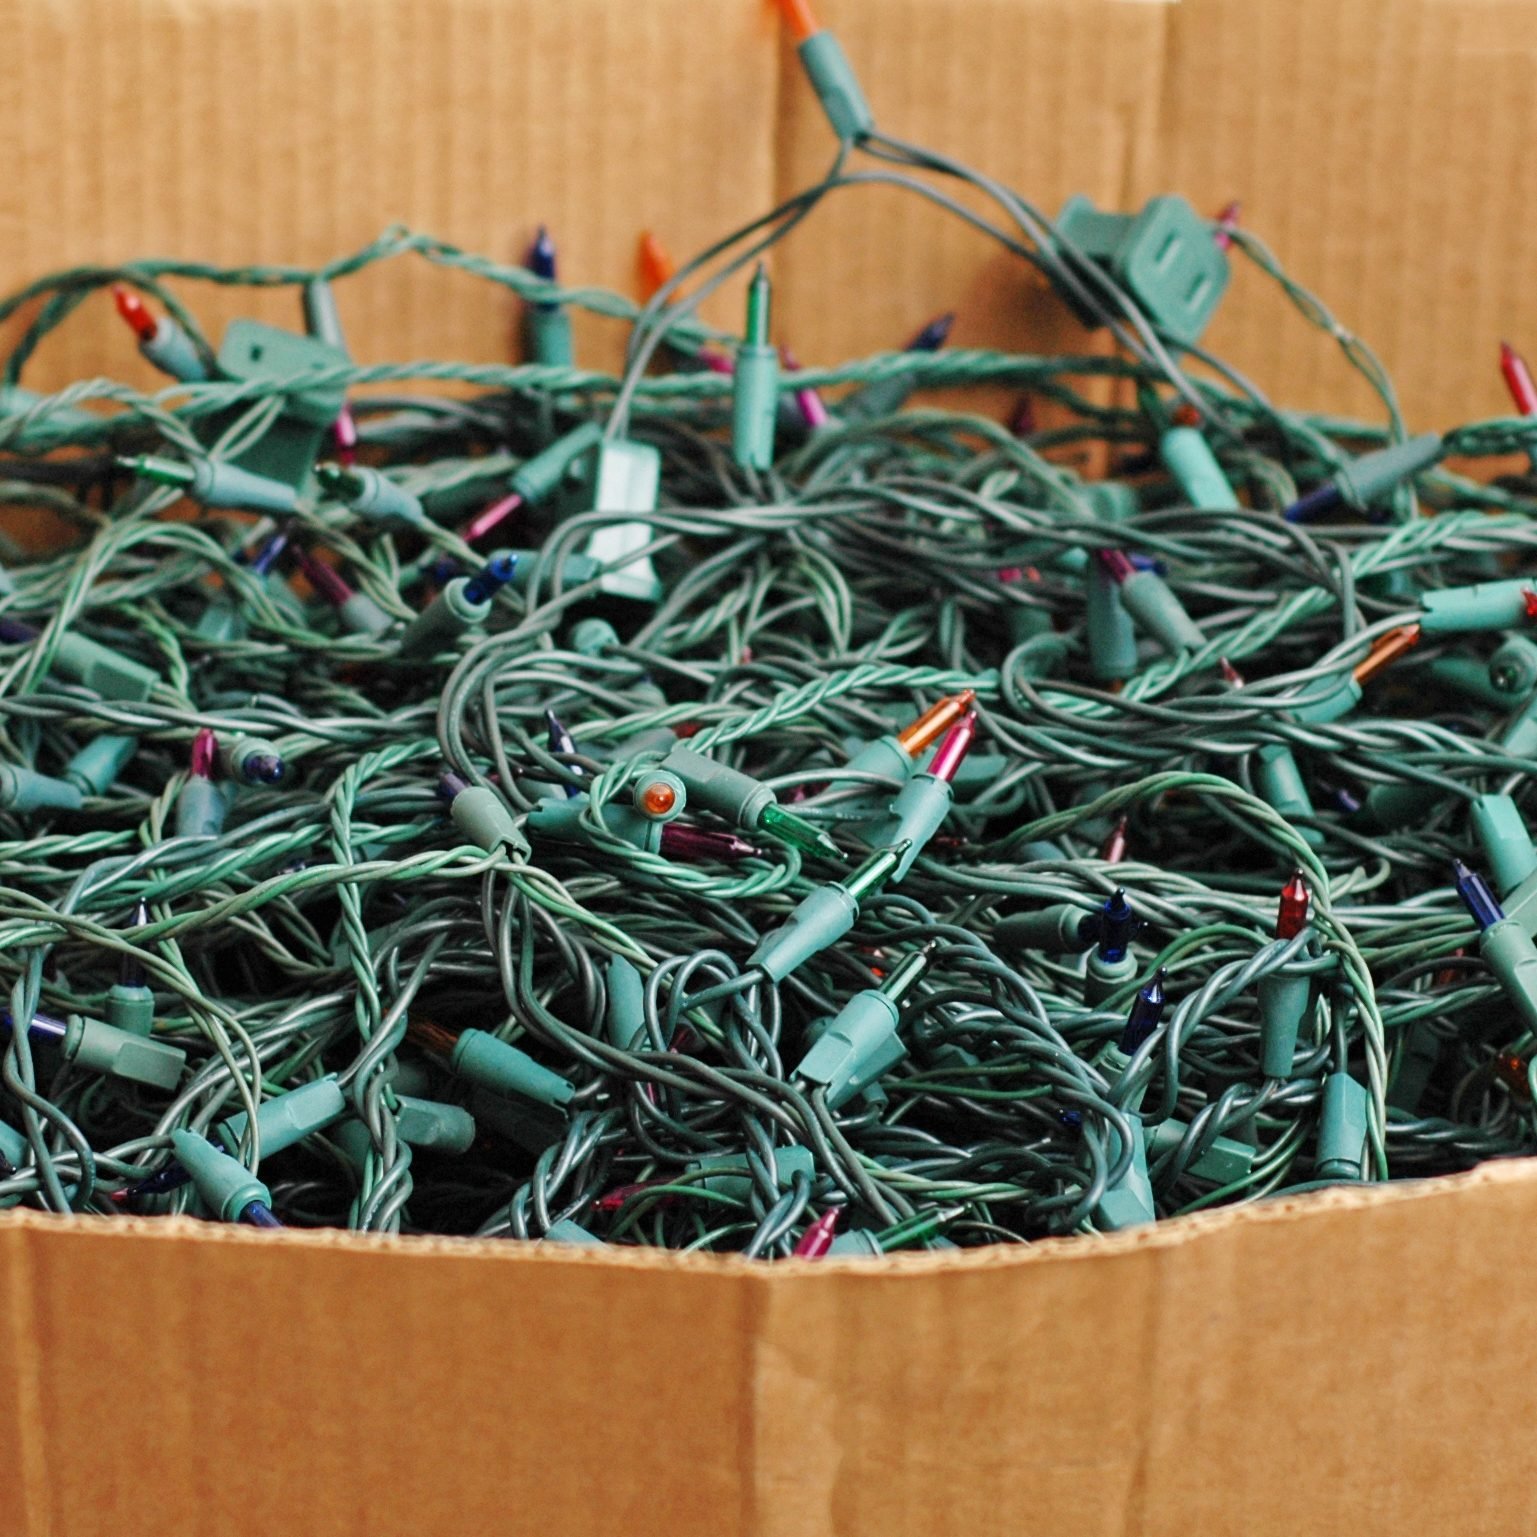 How to store your Christmas lights so they don't get tangled and knotted  up? What is the best way to wrap them up and keep them organized - Quora